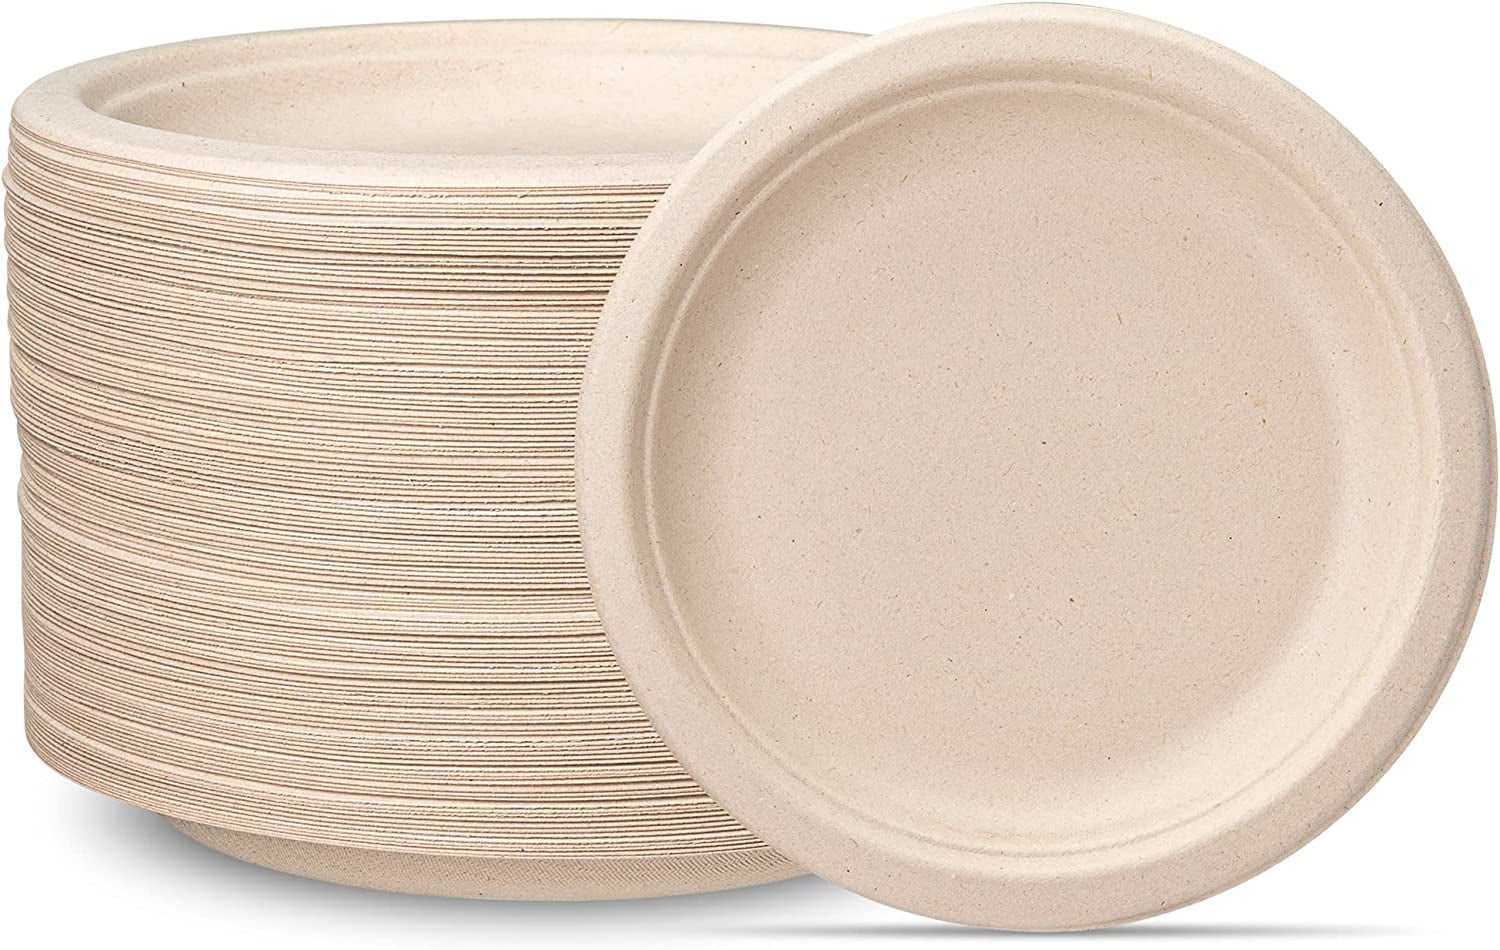 Hihomry Compostable Heavy Duty Paper Plates, Disposable White Plates  Biodegradable, 7 Inch Dessert or Dinner Small Paper Plate, Eco-Friendly  Sugarcane